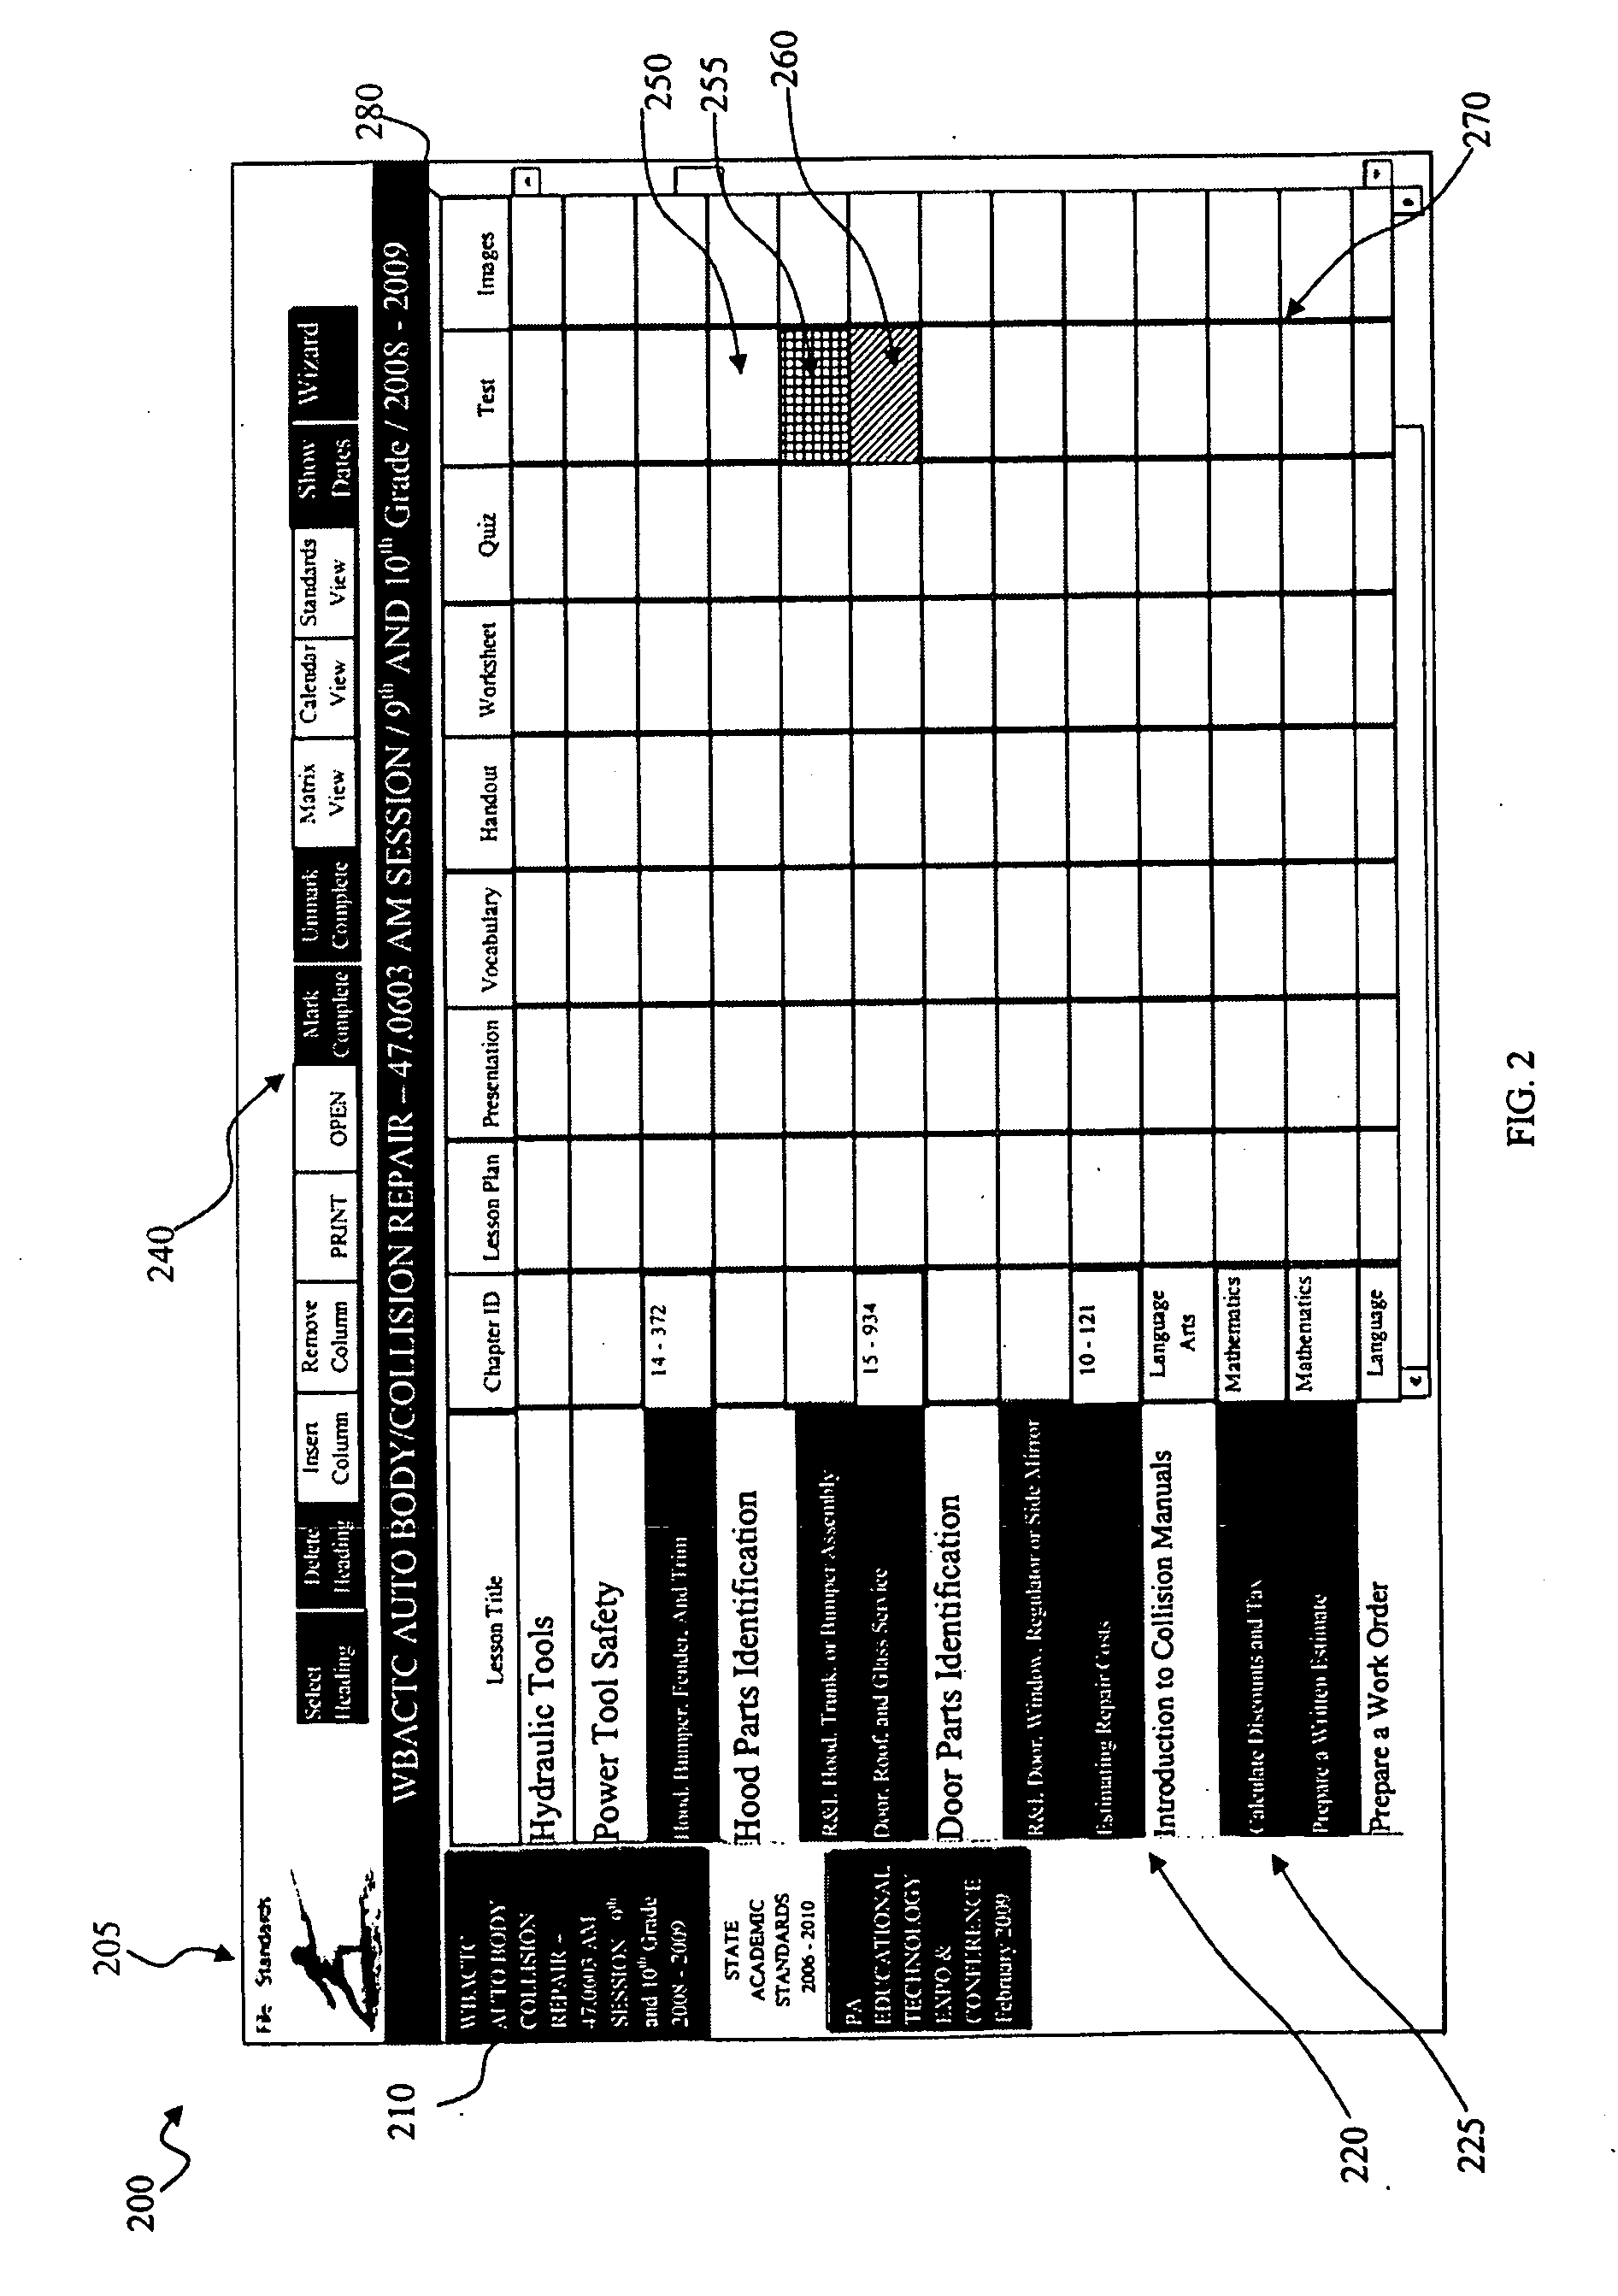 System and Method for Organizing, Managing, and Using Electronic Files